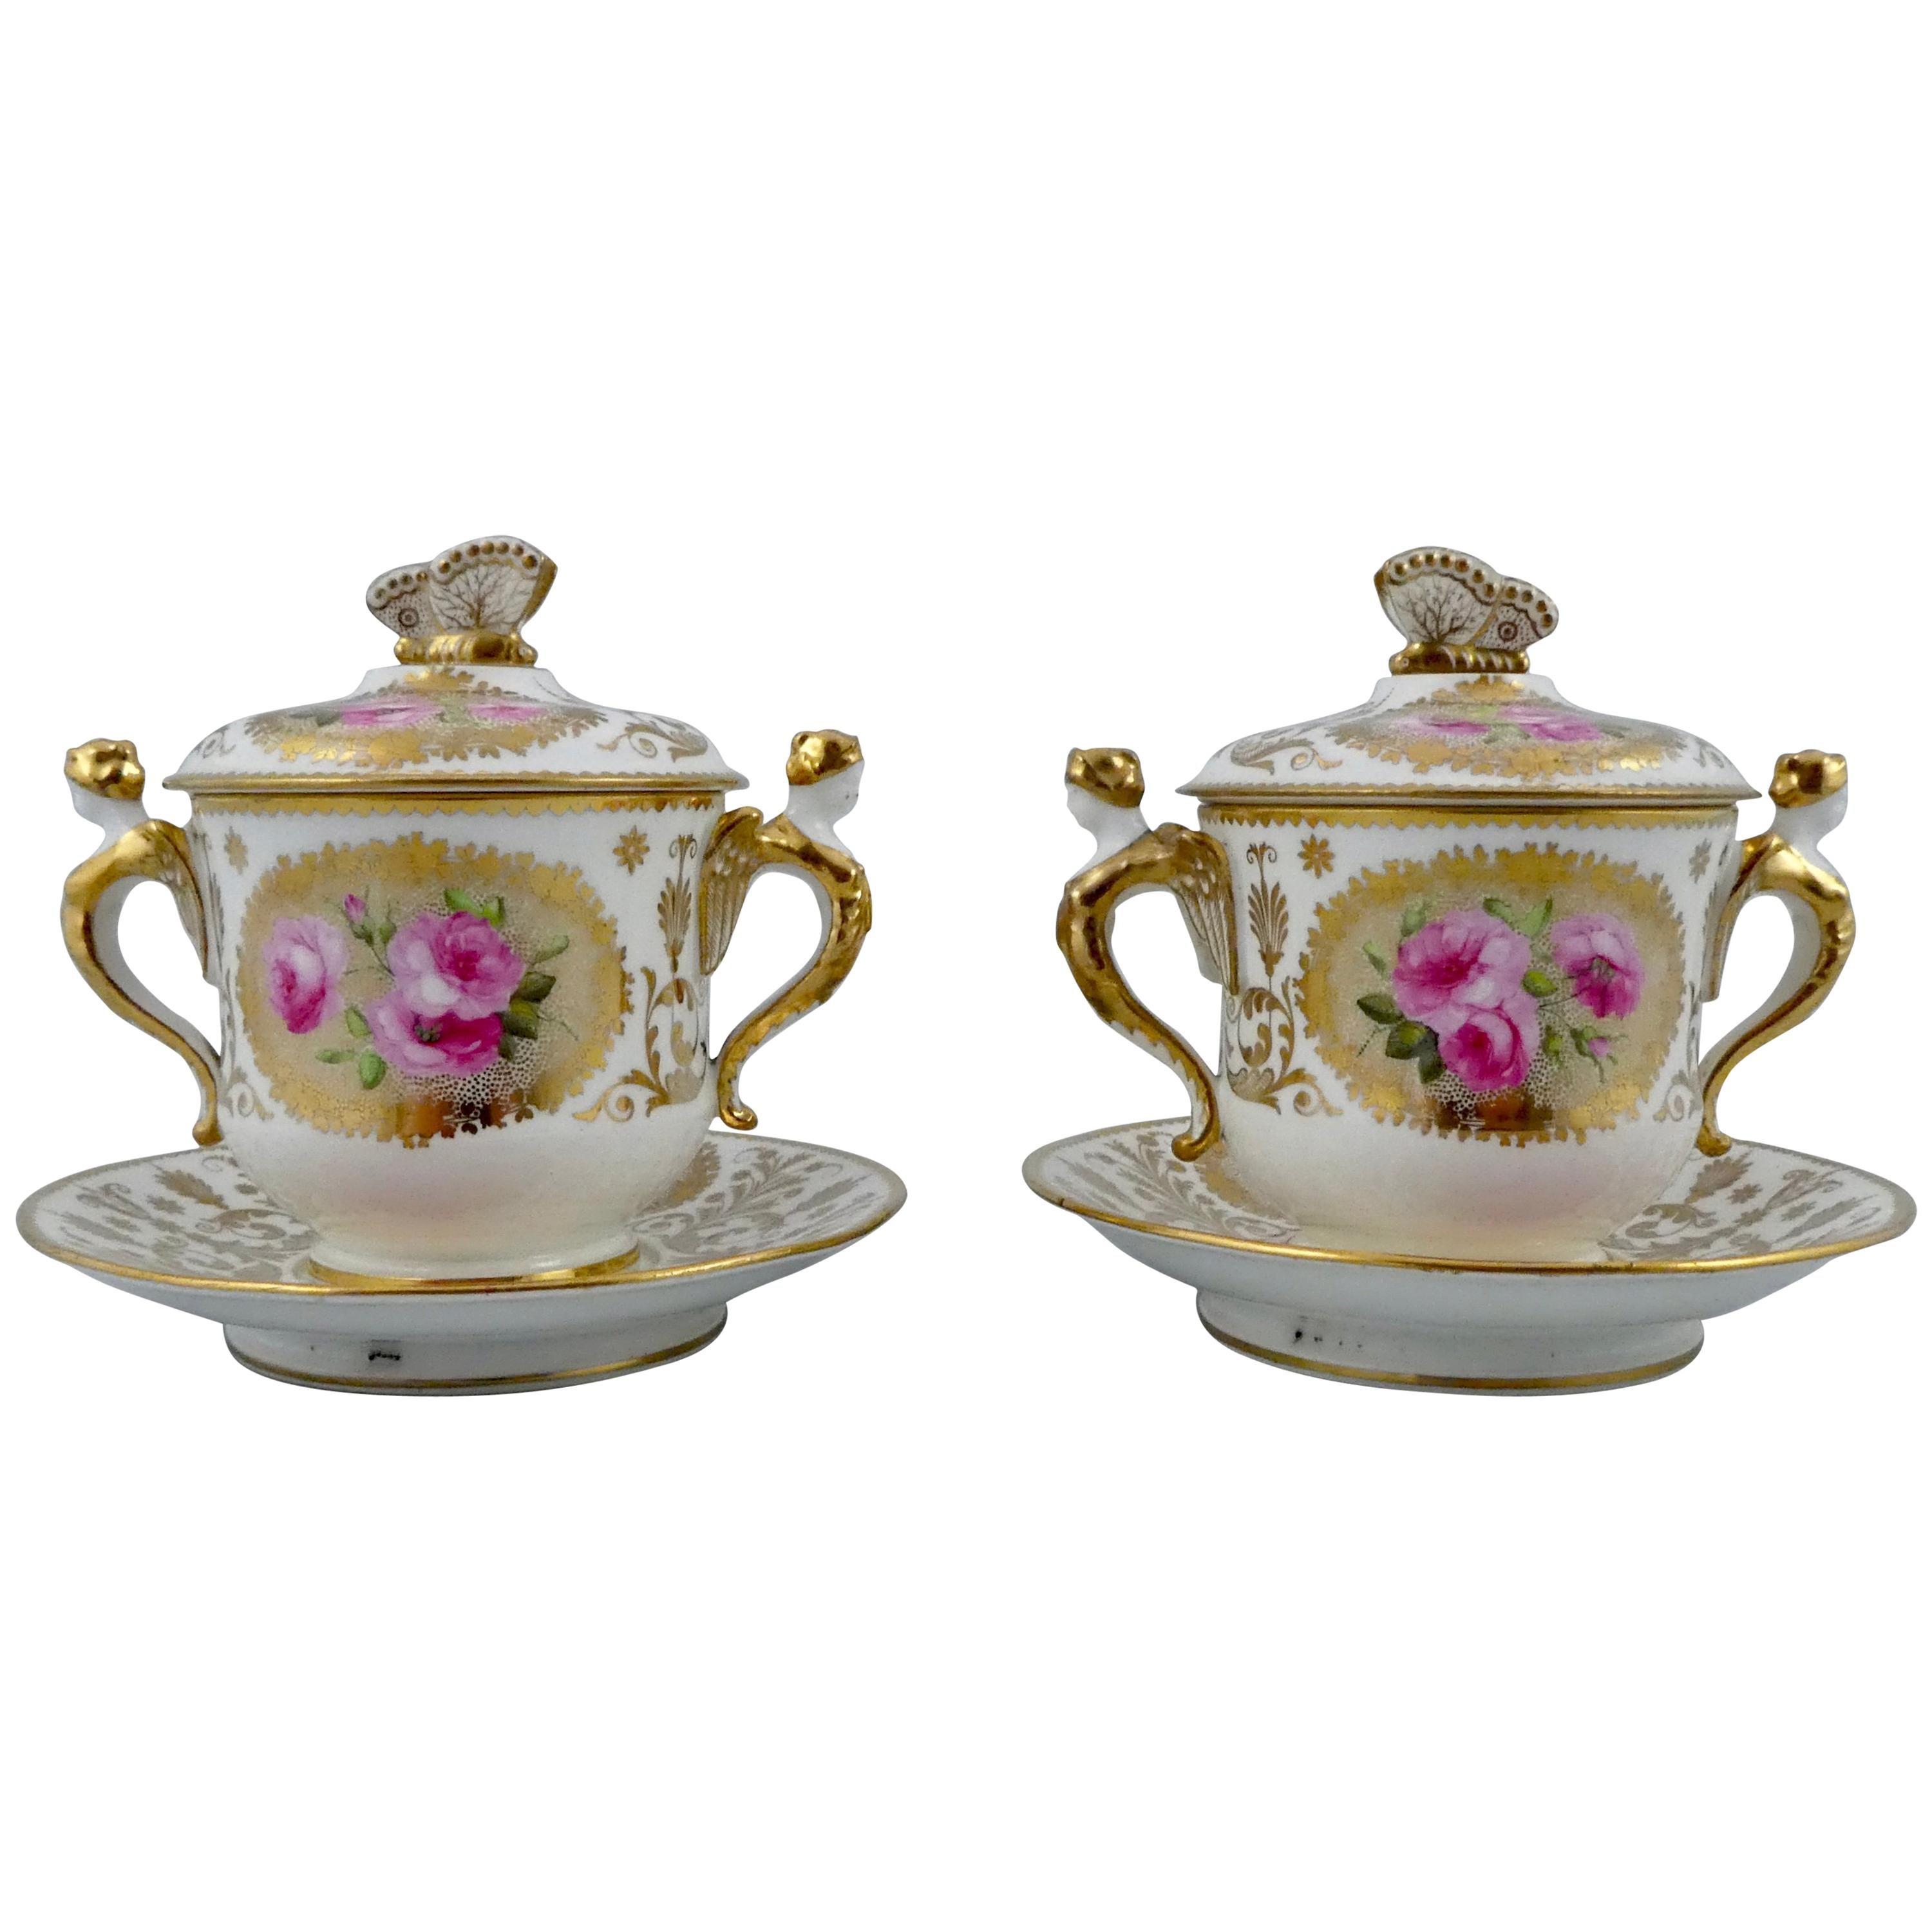 Pair of Spode Covered Cups and Stands, circa 1820